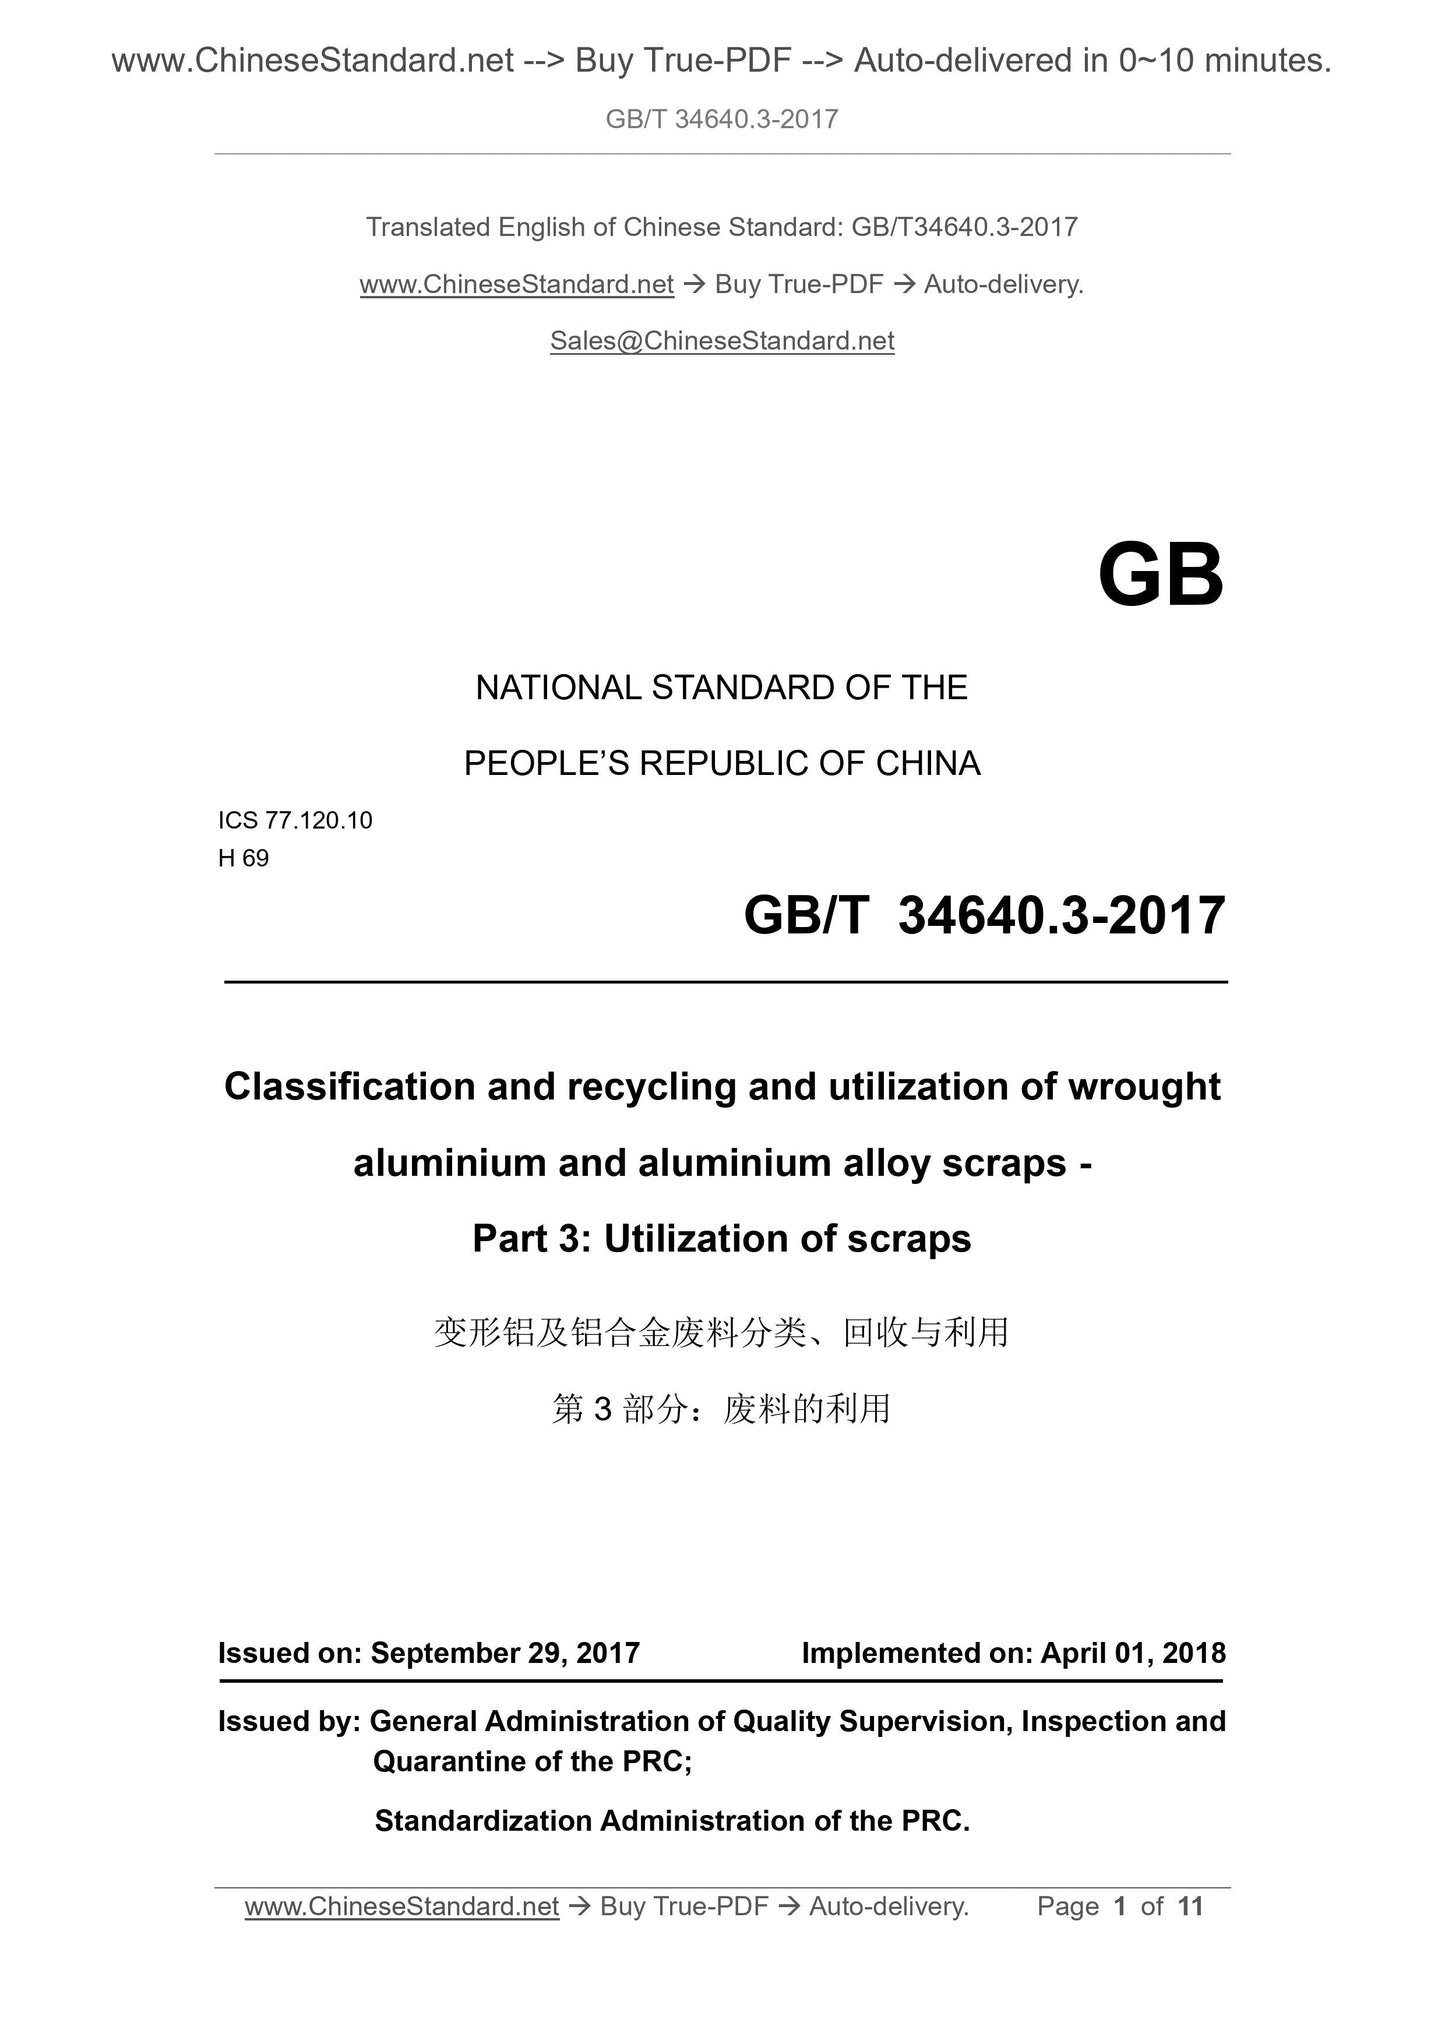 GB/T 34640.3-2017 Page 1